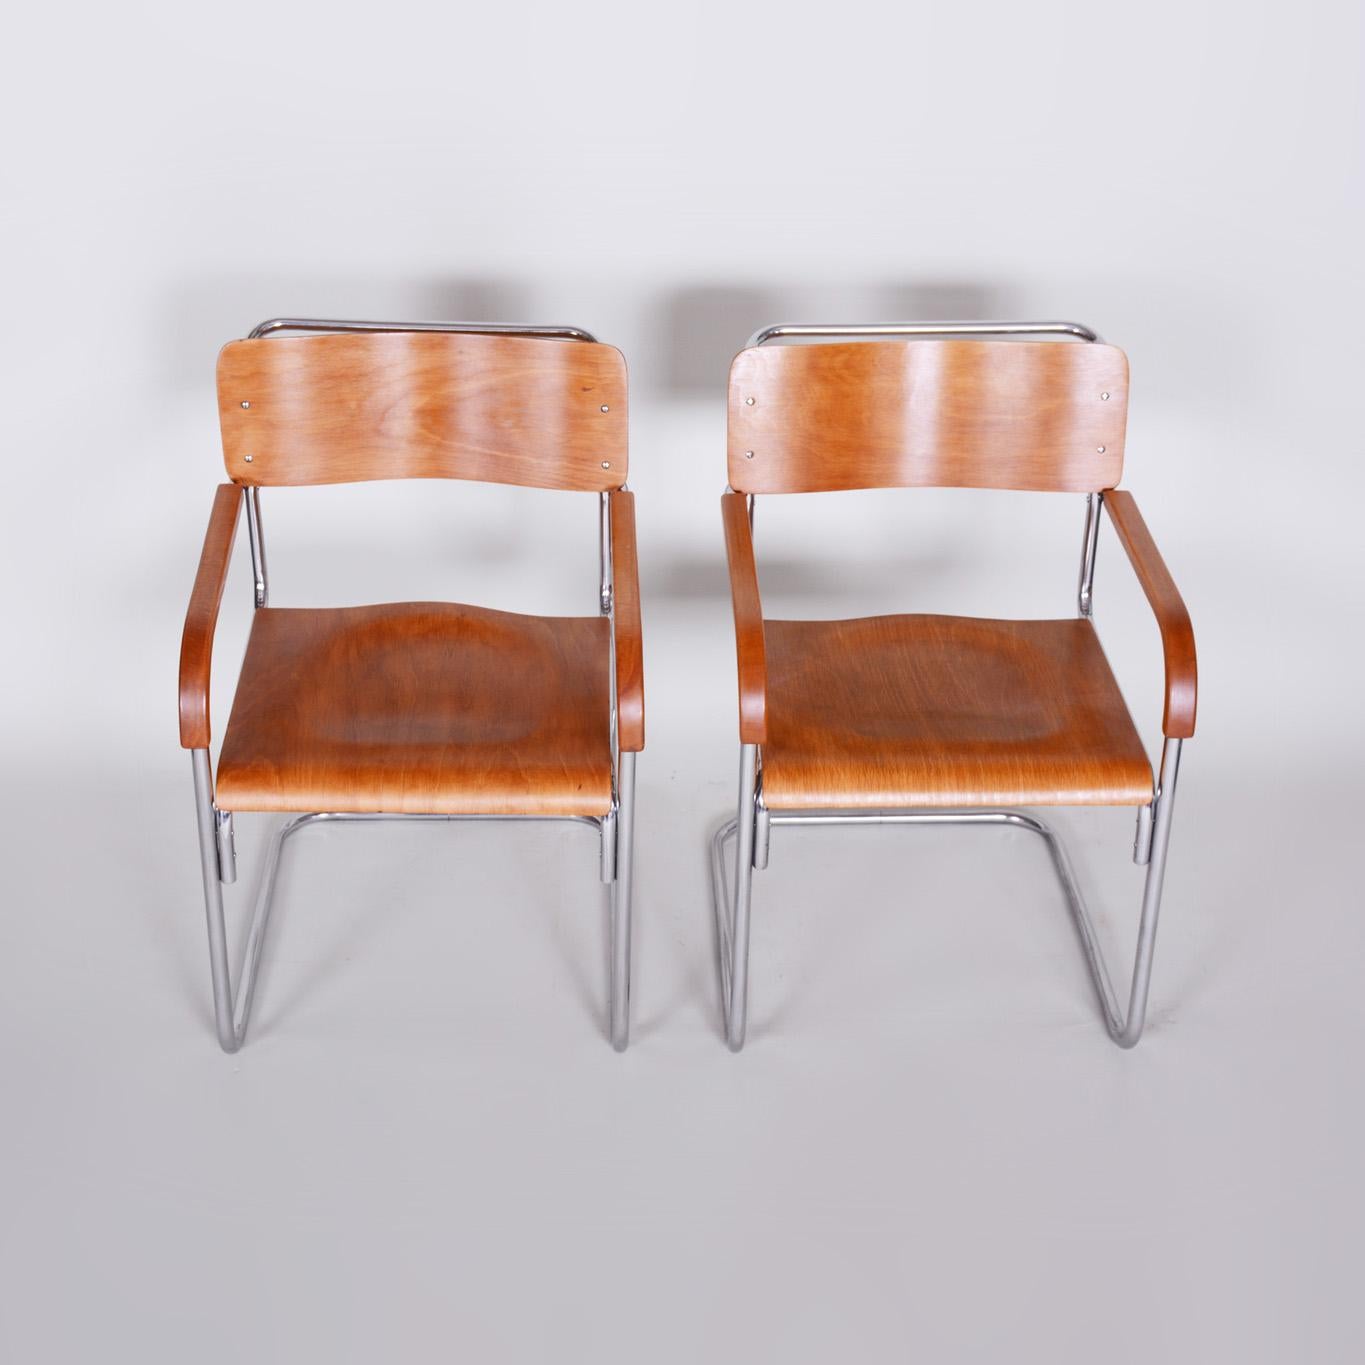 Pair of Mucke Melder Bauhaus Armchairs Made in 1930s Czechia, Restored In Good Condition For Sale In Horomerice, CZ